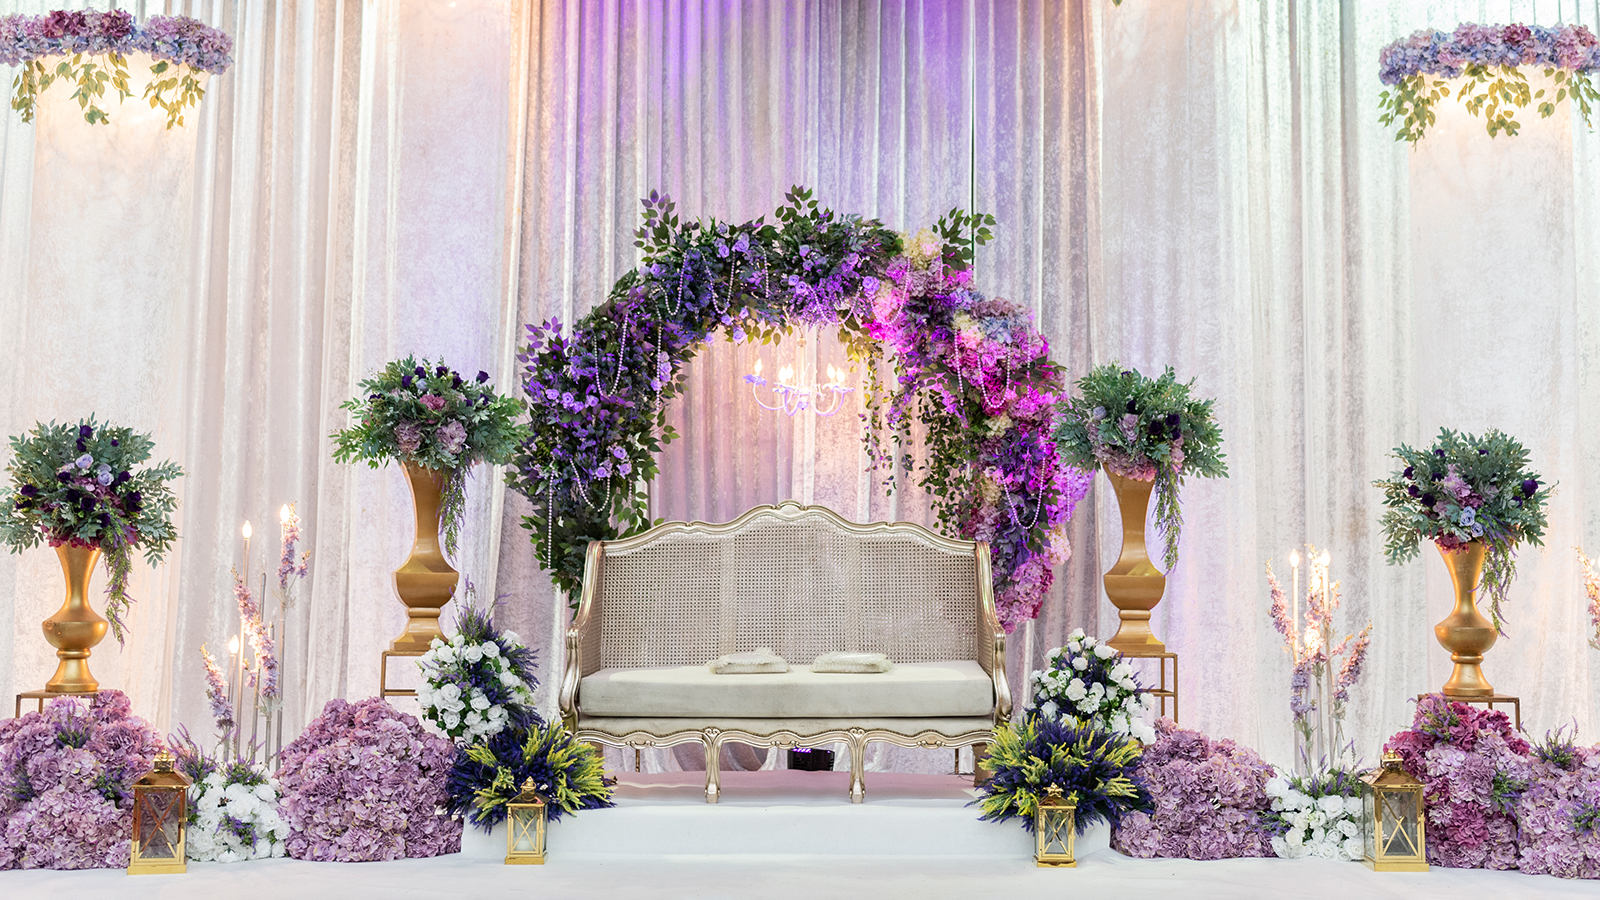 Luxury Wedding Arch with floral decorations in the form of big vases and bouquets, tall white backdrop and tall flowers post